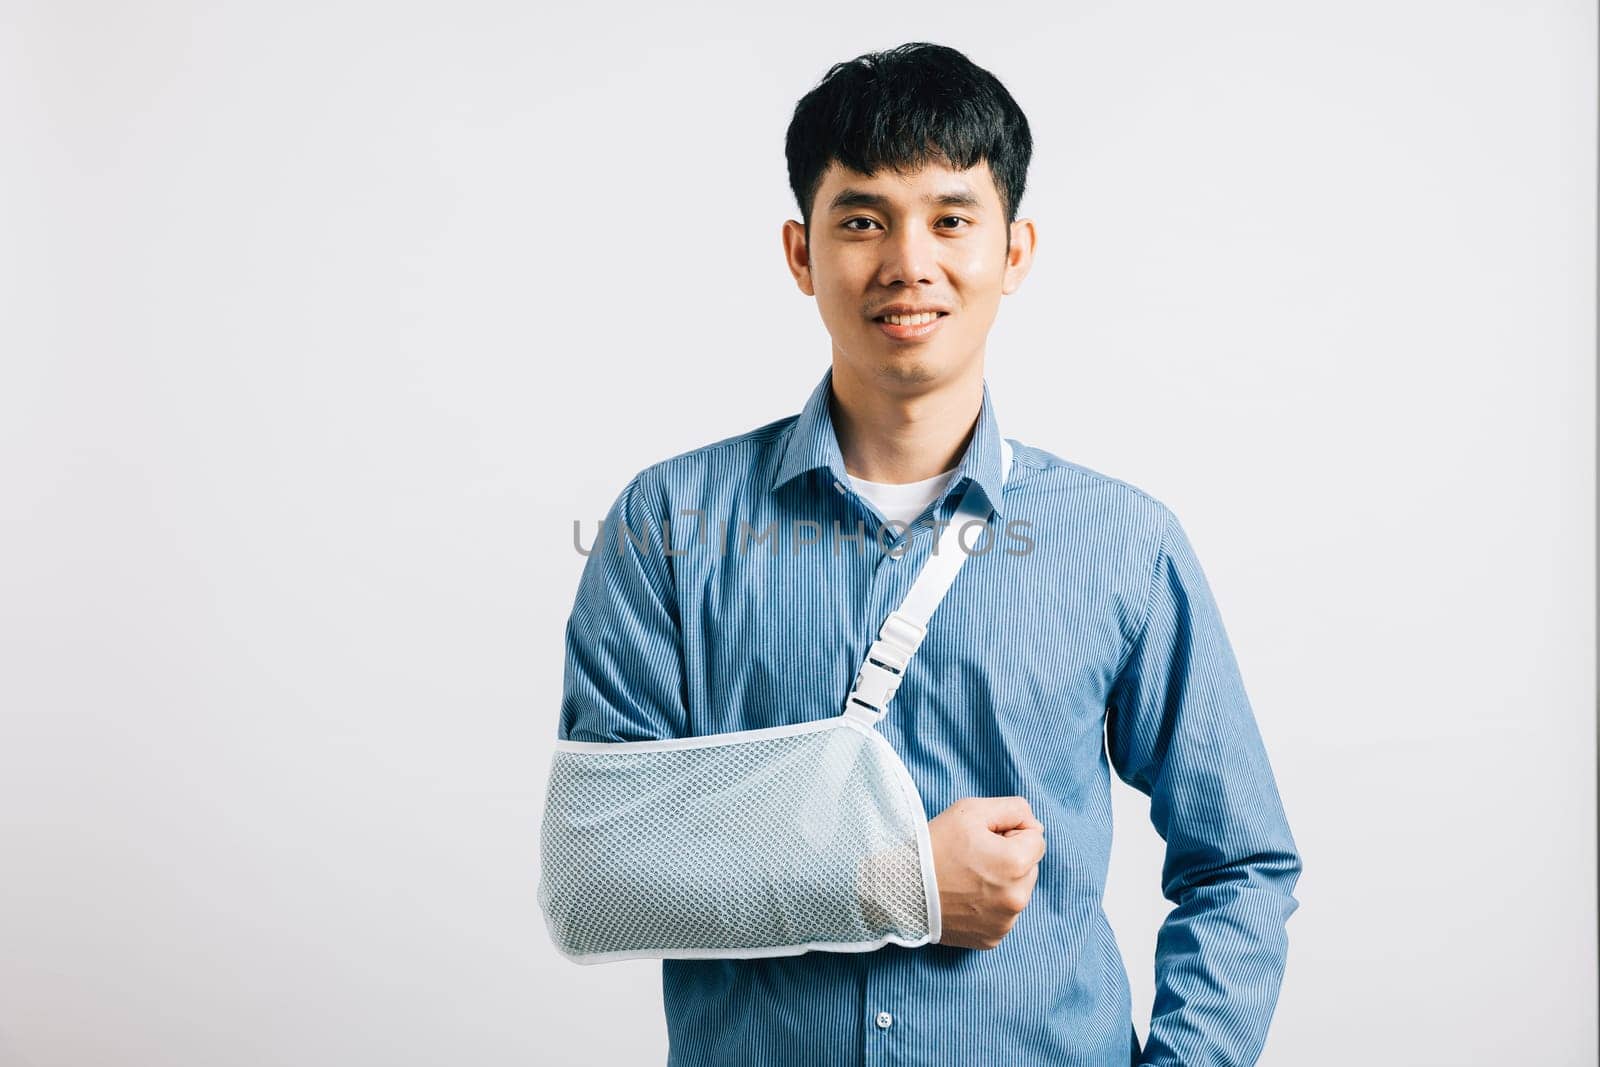 An optimistic businessman, despite his broken arm, smiles while wearing treatment splint. excited Asian man with arm support, studio shot isolated on white background, showcasing recovery. Copy space